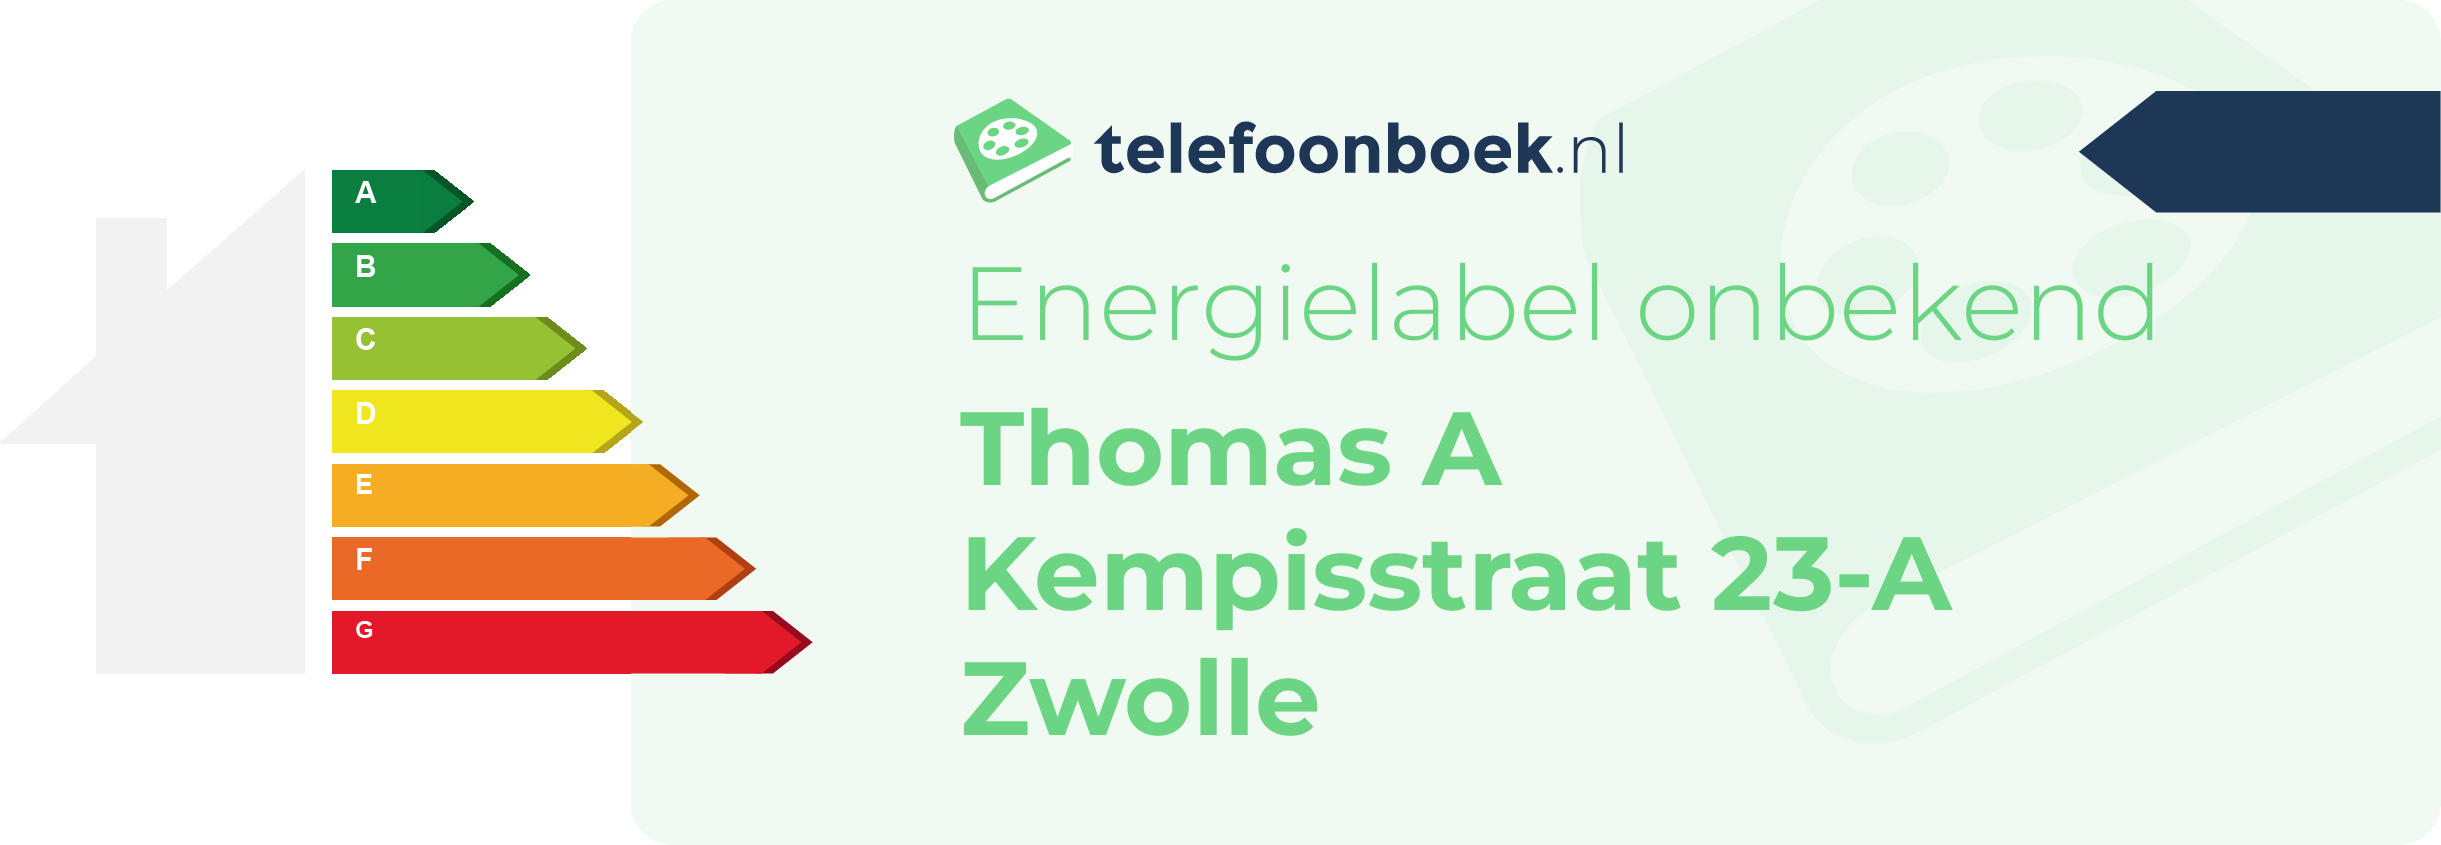 Energielabel Thomas A Kempisstraat 23-A Zwolle